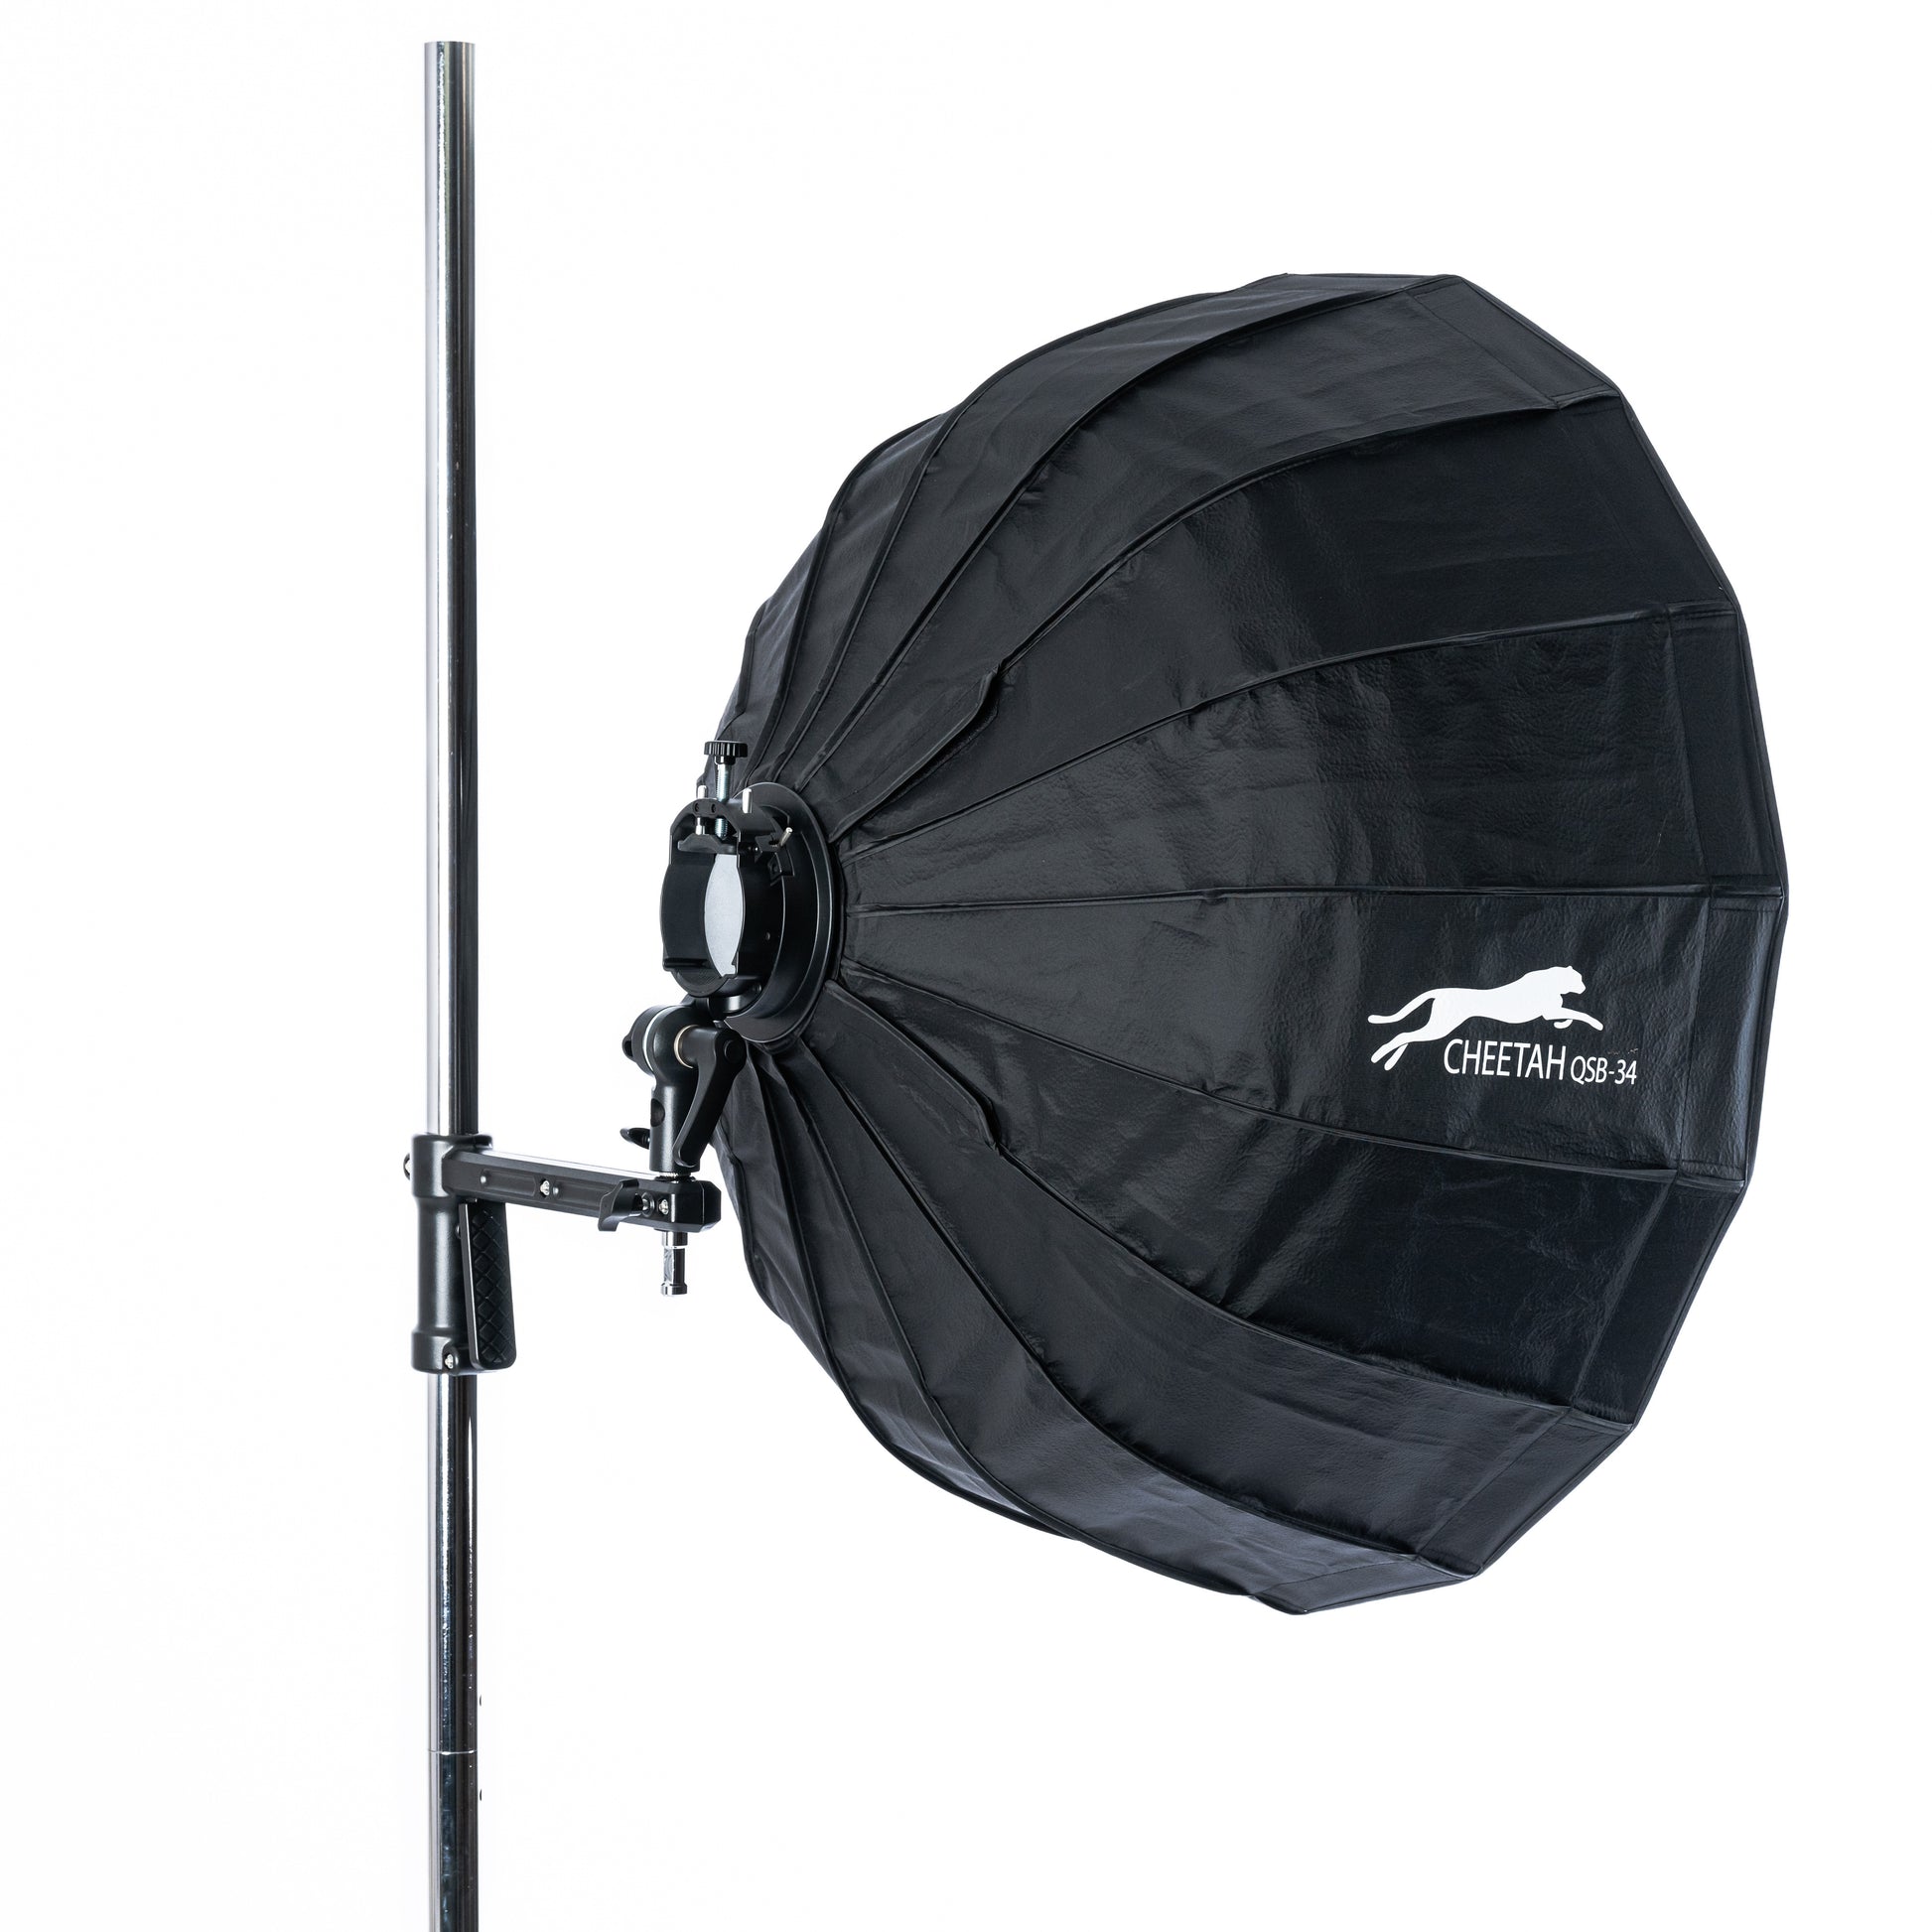 Cheetahstand Pistol Grip with QSB34 Softbox Mounted